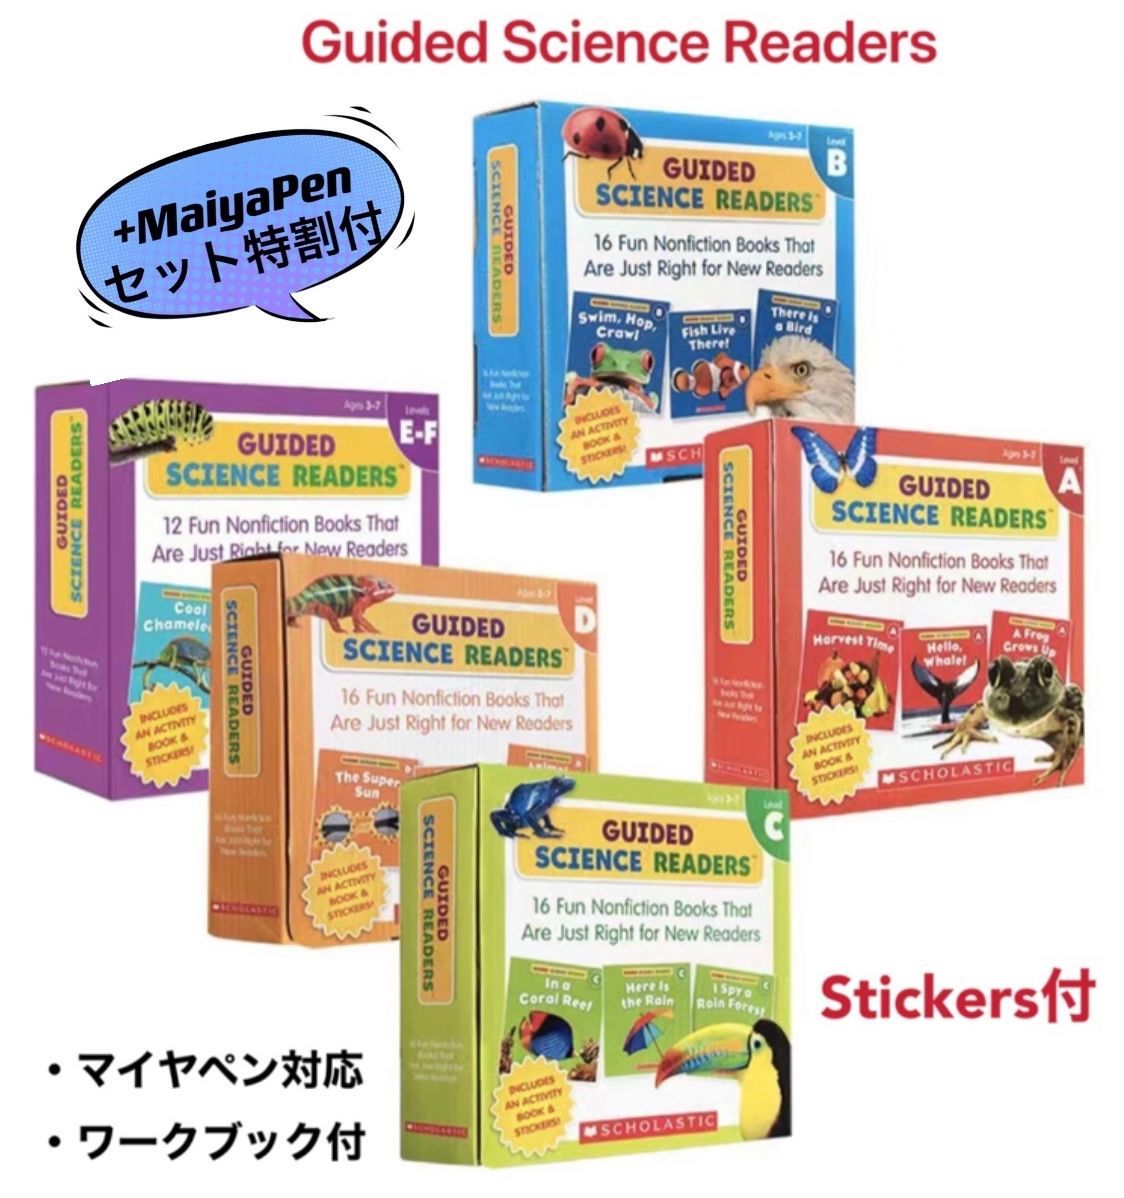 Guided Science Readers 全冊音源付 マイヤペン 対応 - 絵本